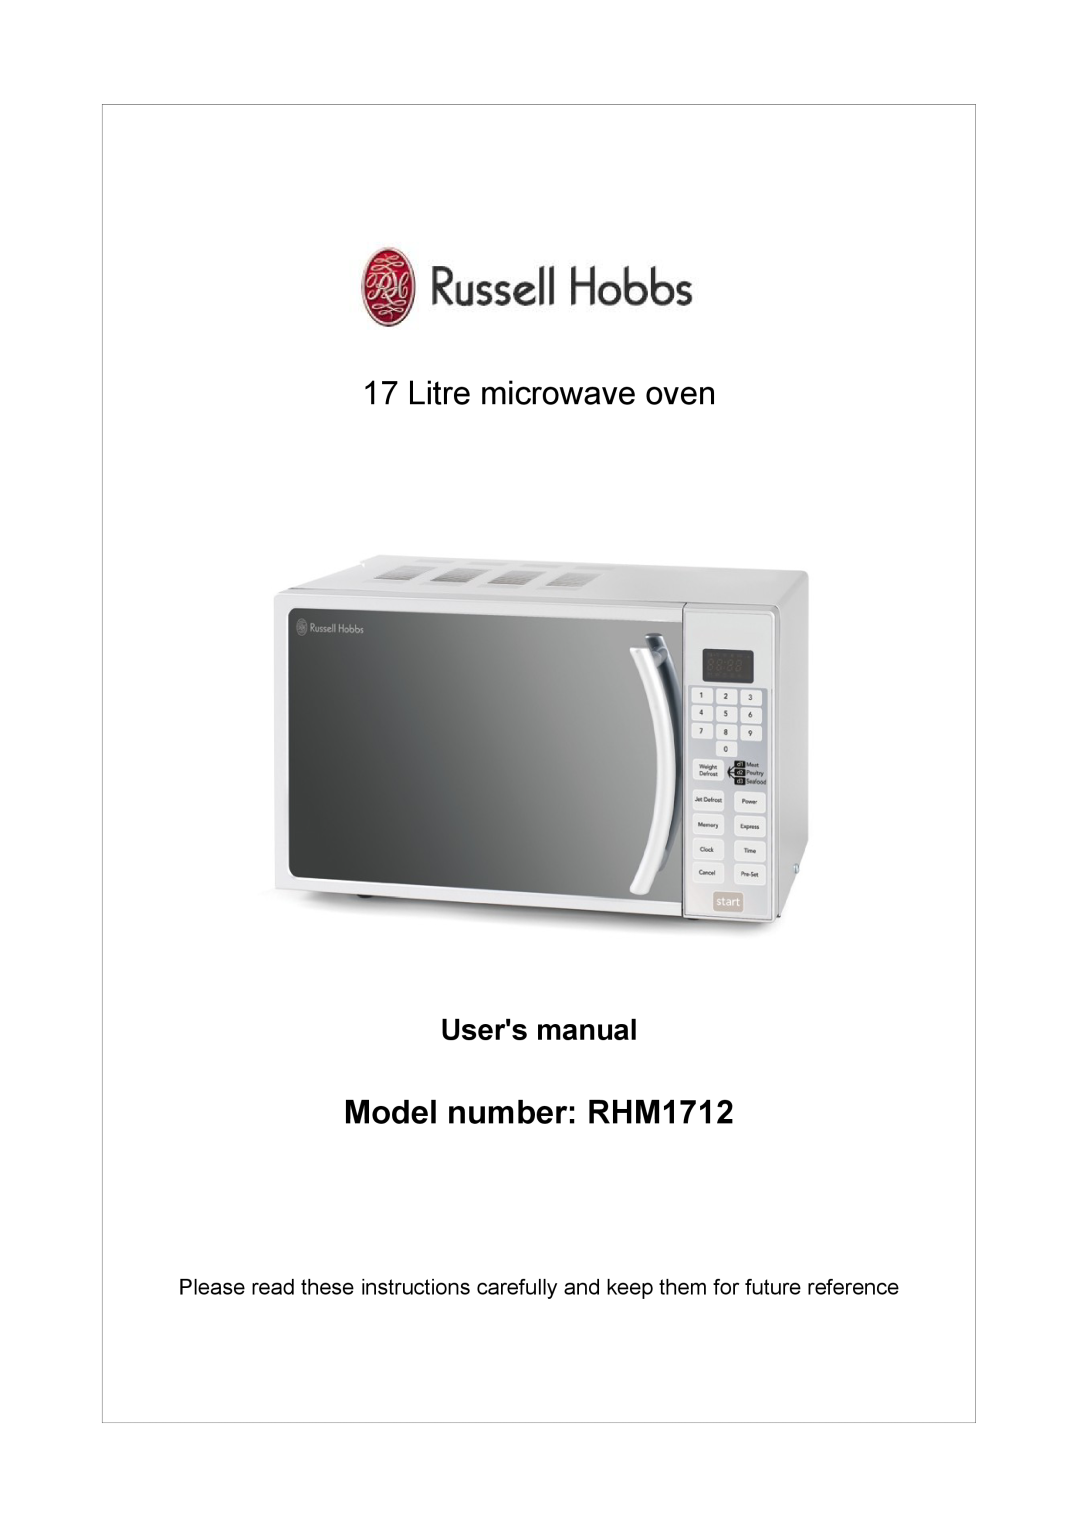 Russell Hobbs user manual Litre microwave oven, Model number RHM1712 